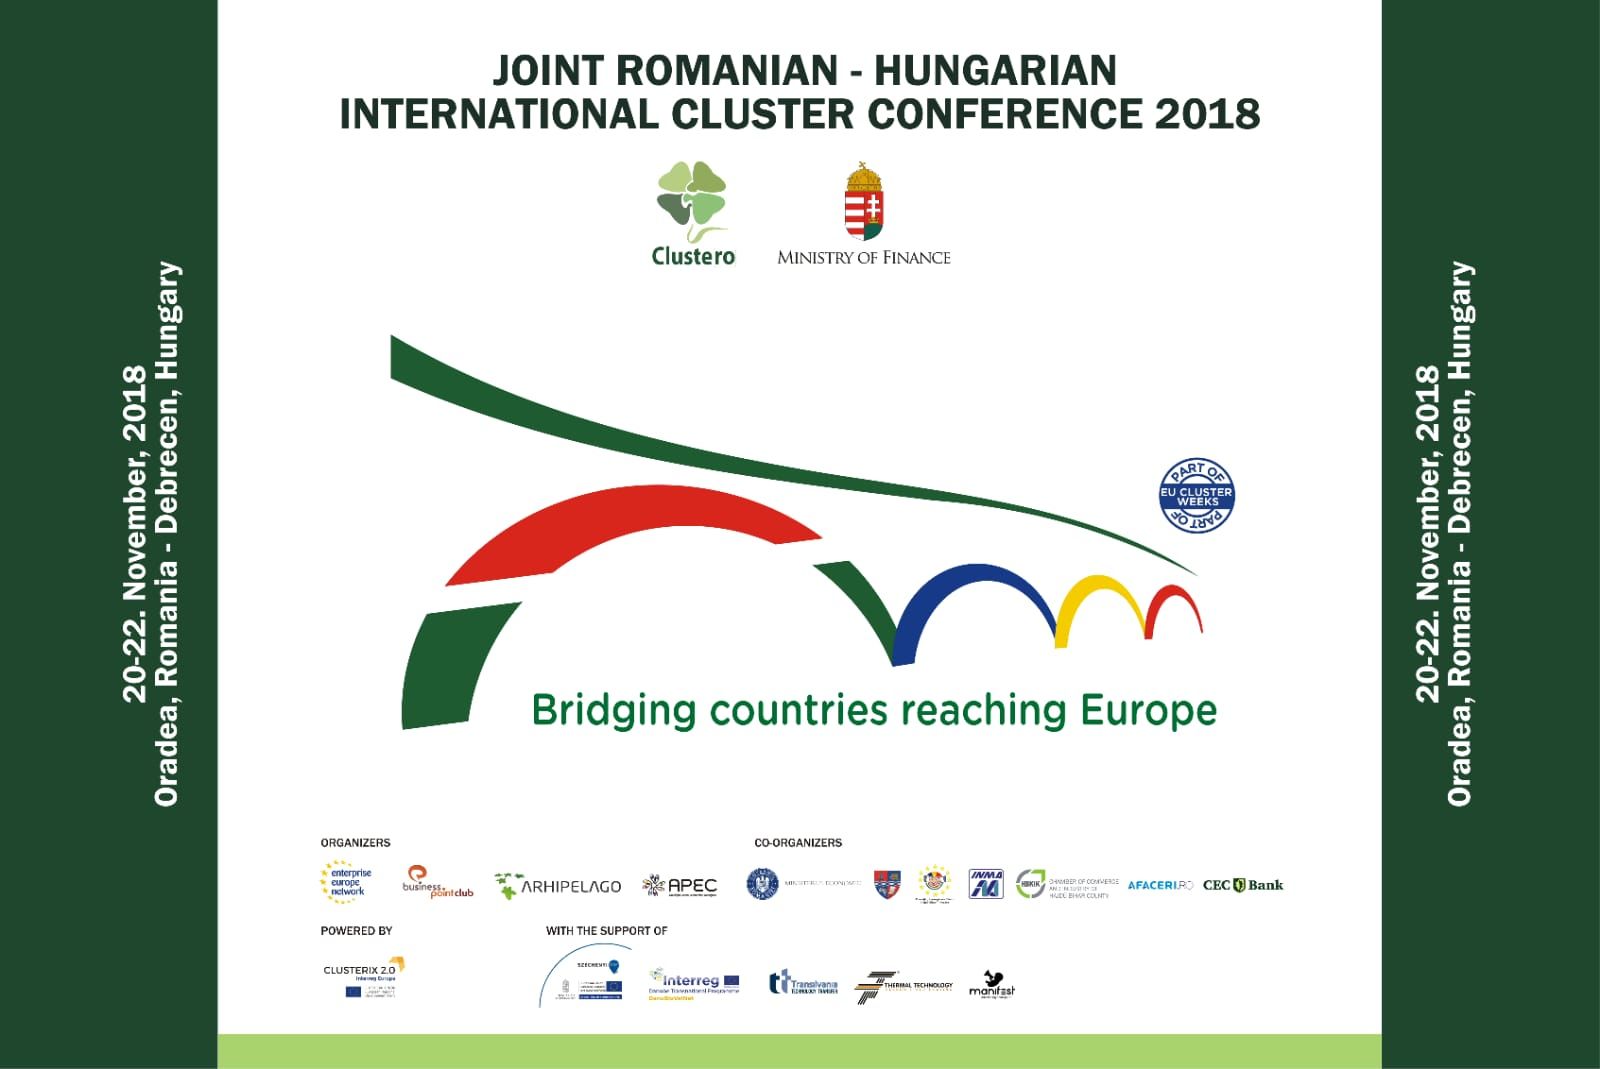 The Joint Romanian-Hungarian Cluster Conference 2018